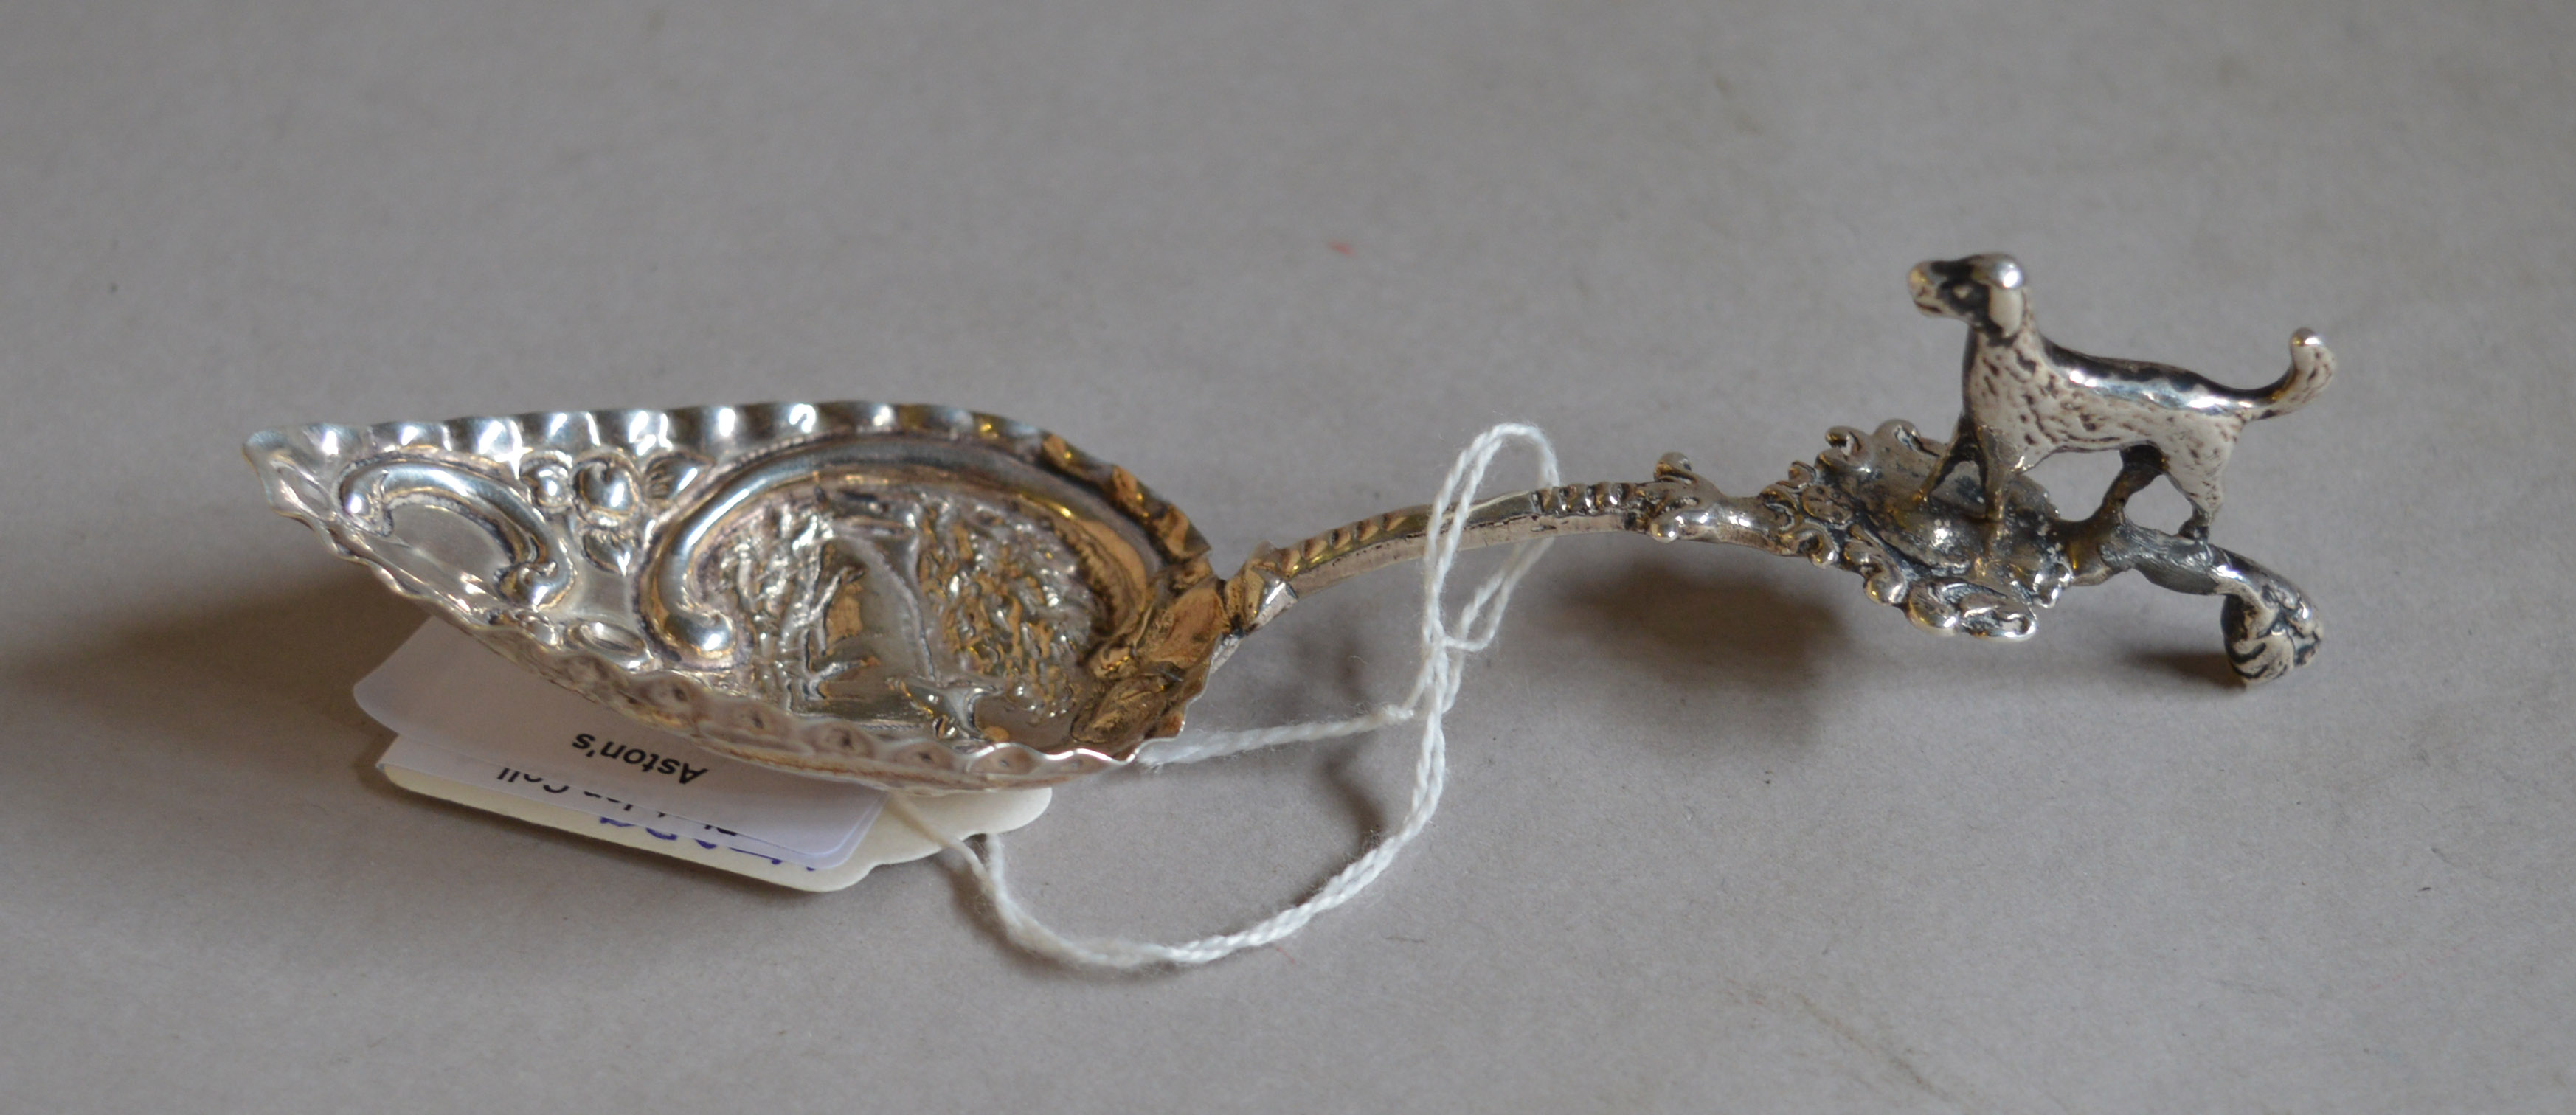 HM silver spoon with dog adornment.